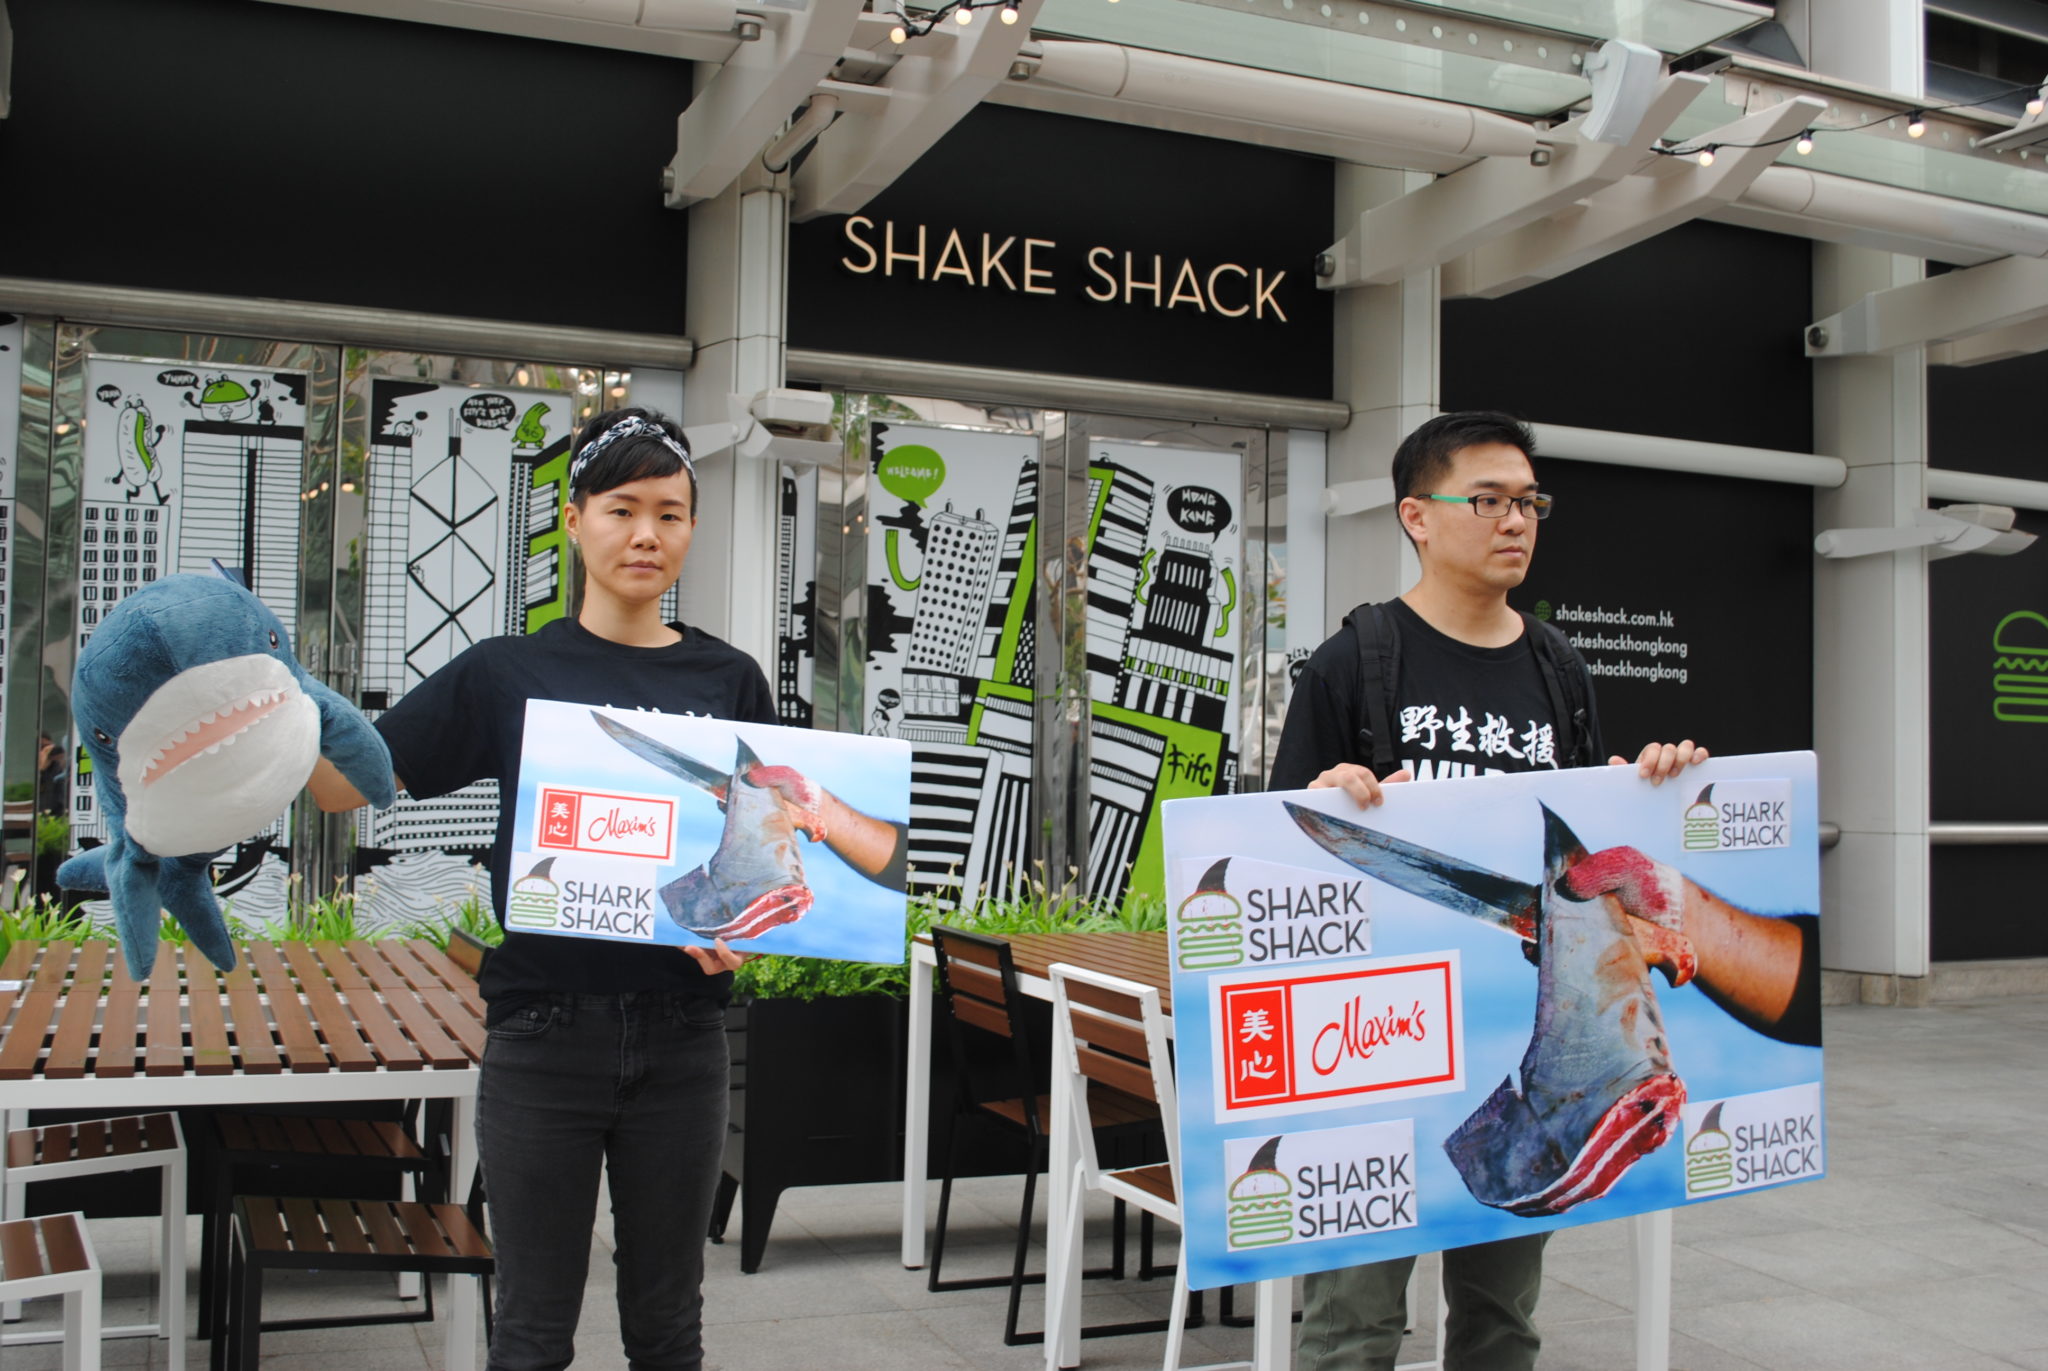 Demonstrators from environmental group WildAid crash the opening of Shake Shack's first Hong Kong store to protest their local partner Maxim's involvement in the shark fin trade. (Image: Ryan Kipatrick)